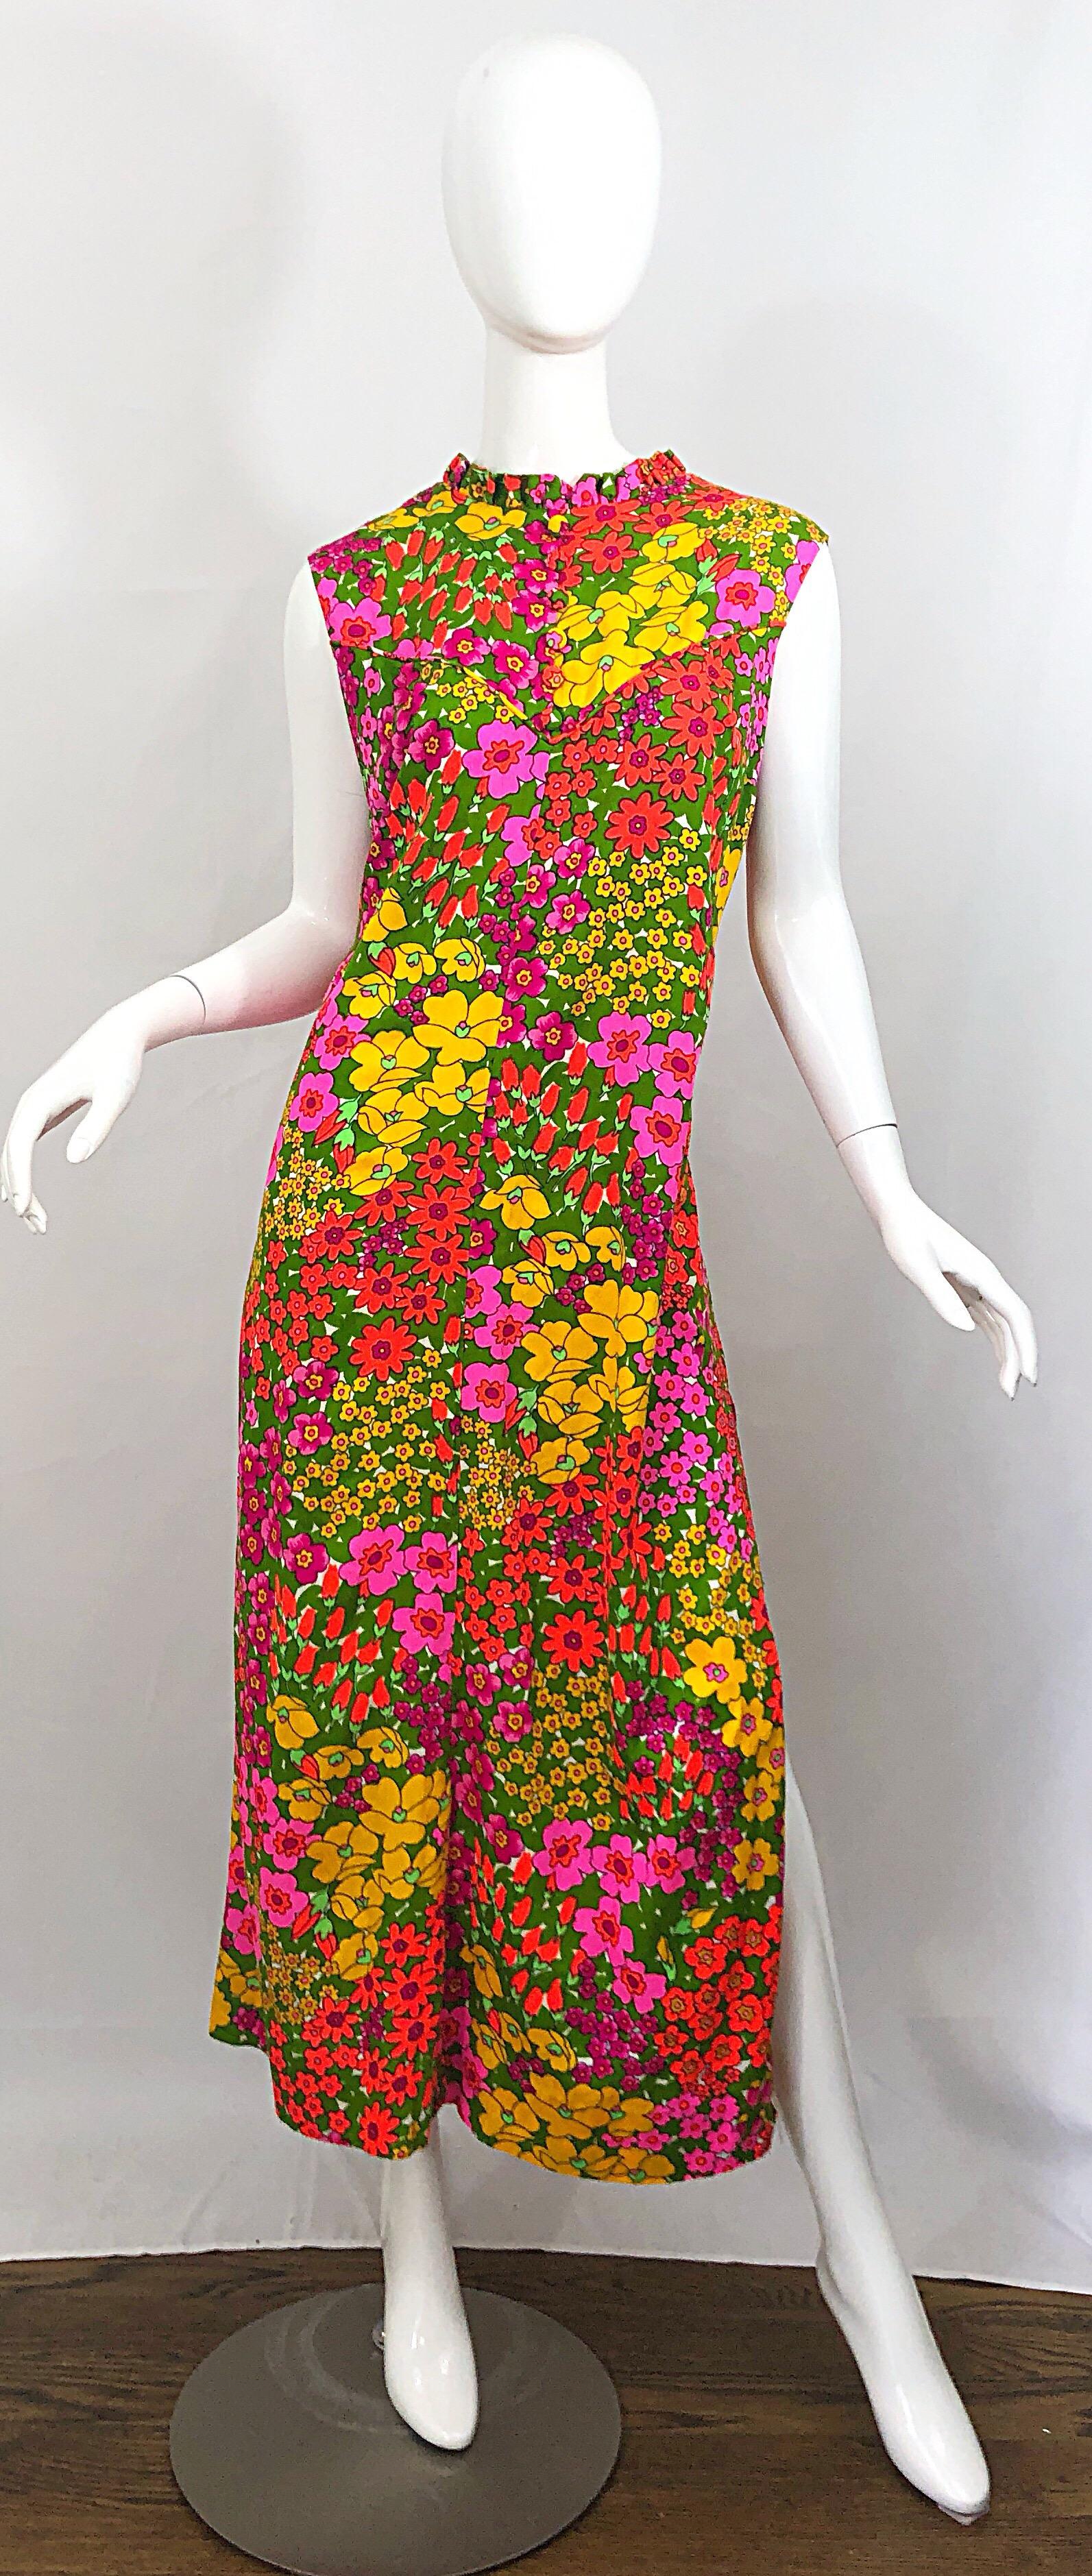 Incredible LIBERTY HOUSE 1970s plus size (current 16/18) colorful neon flower print cotton / rayon maxi dress! Features vibrant colors of hot pink, neon green, orange and yellow throughout. Chic ruffled collar with mock buttons up the center neck.